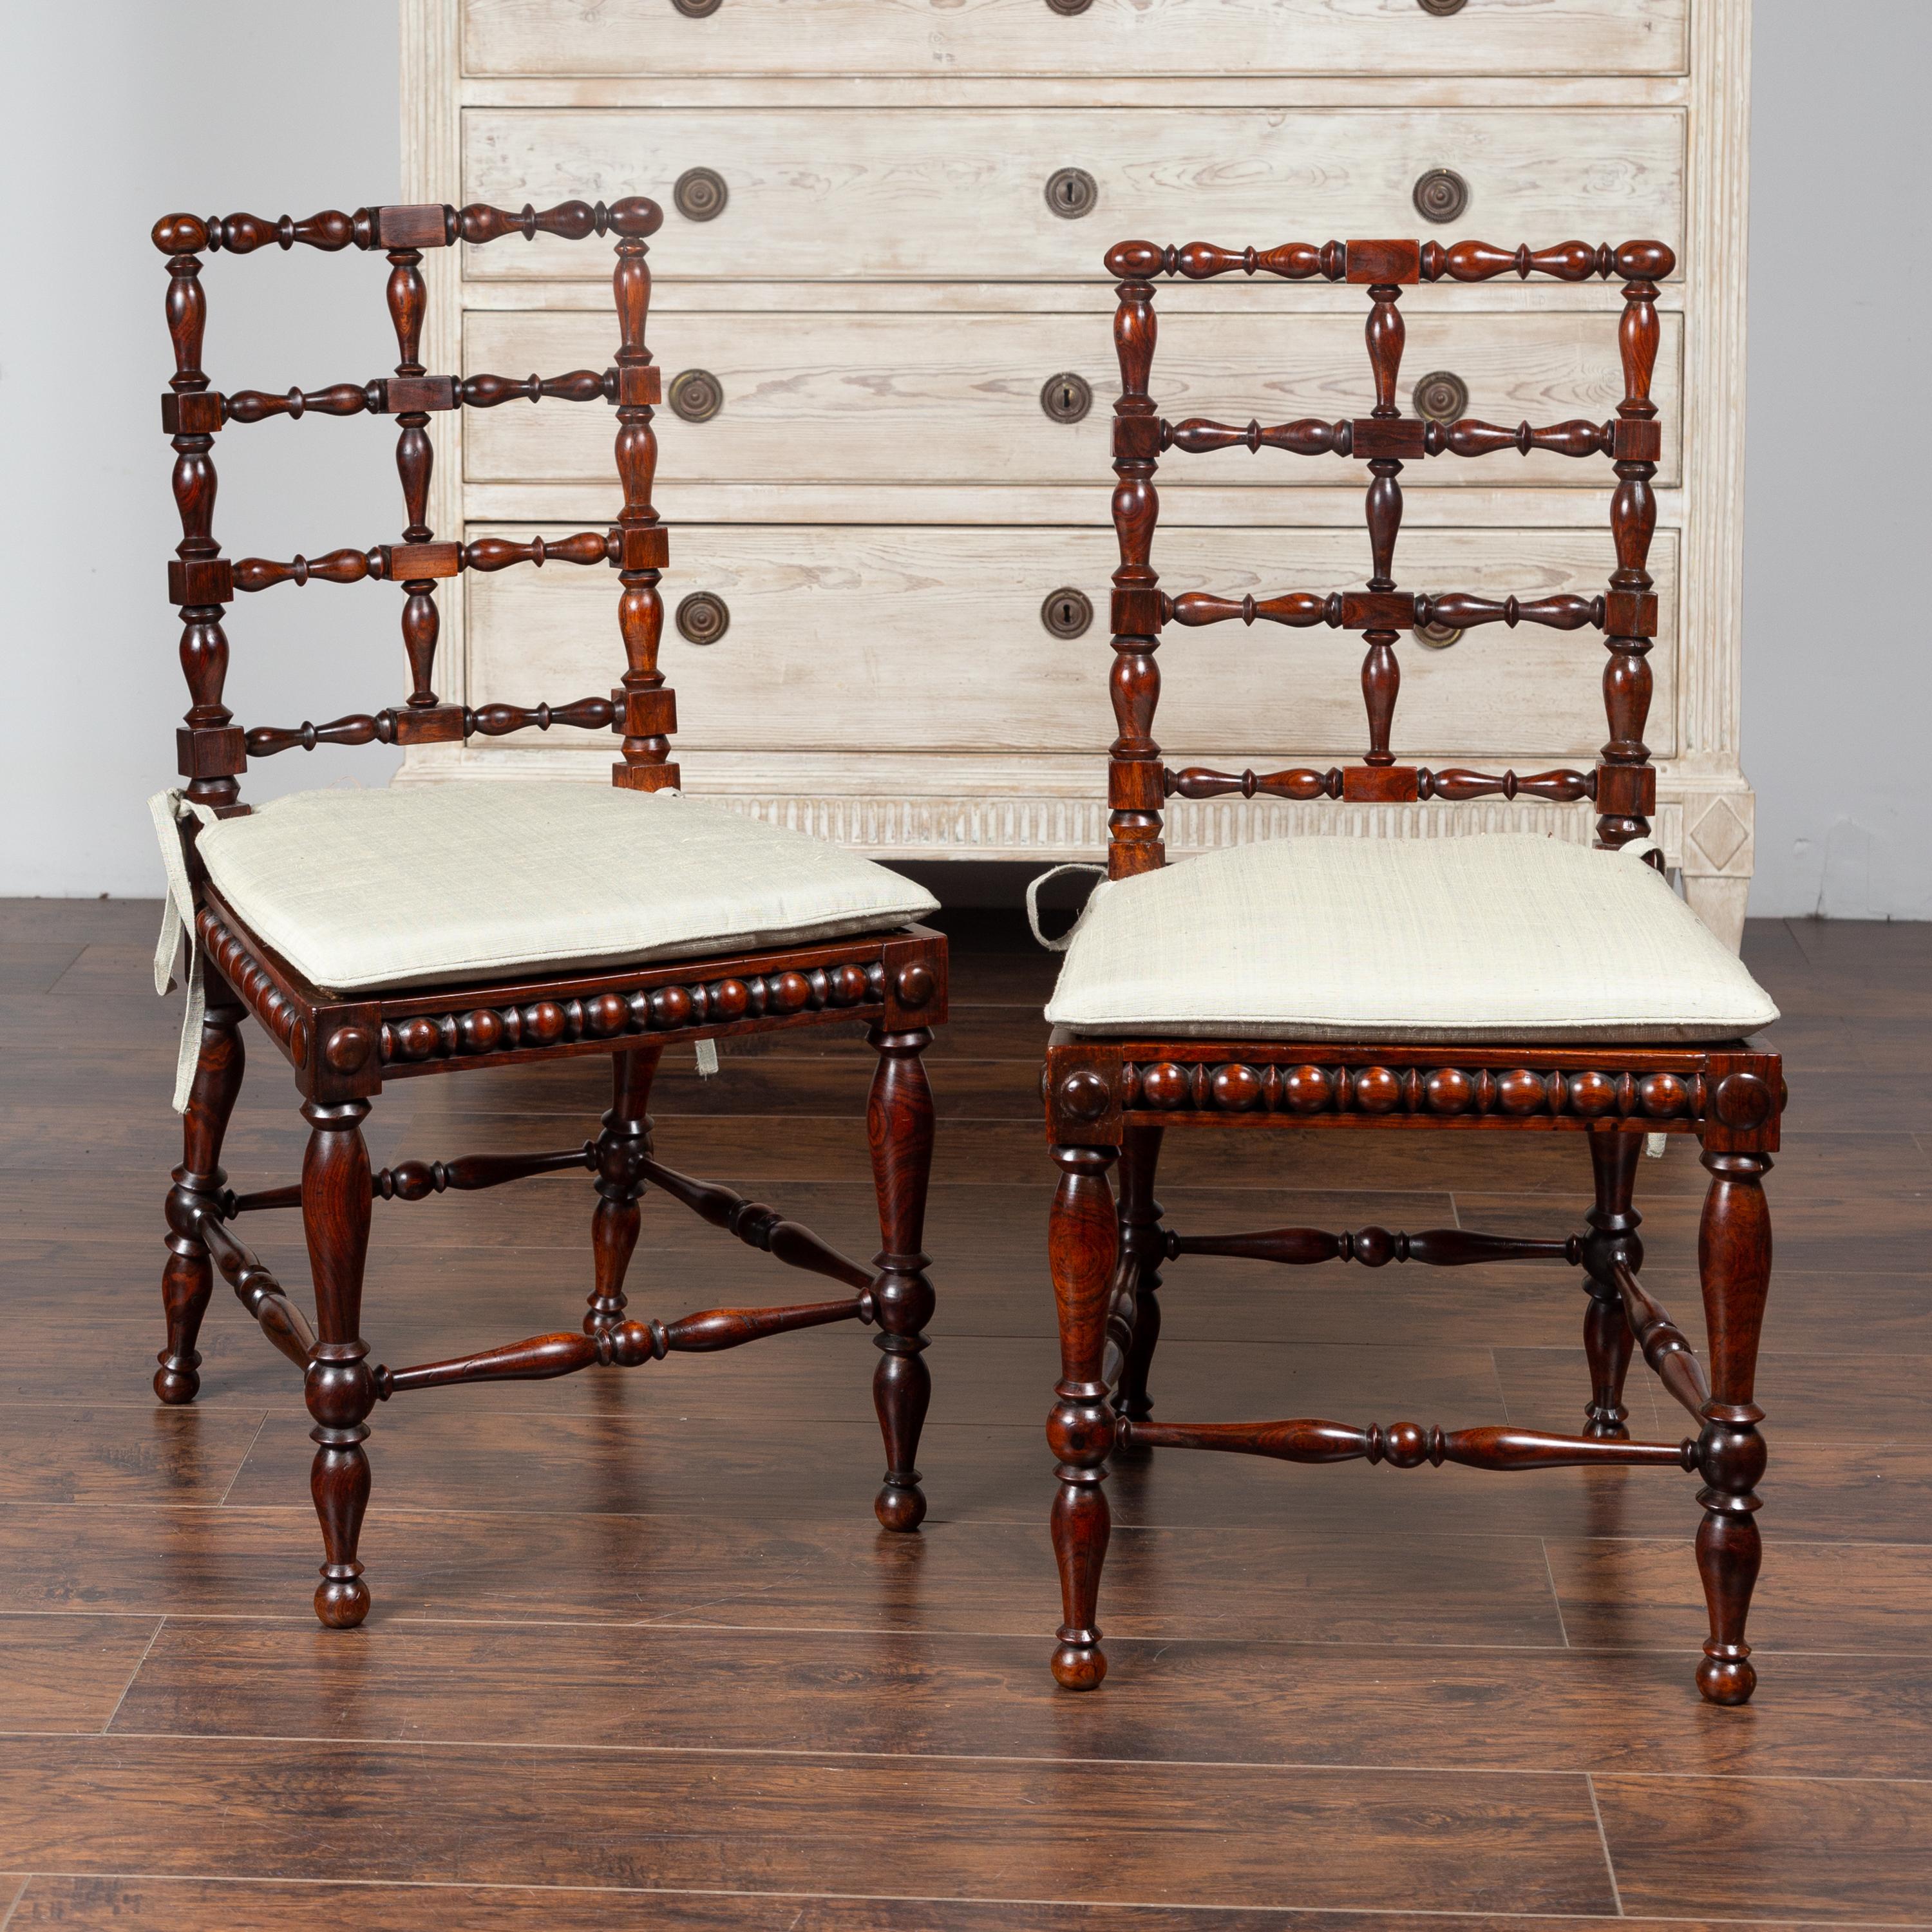 A pair of English rosewood side chairs from the 19th century, with turned spindle motifs, cane seats and small cushions. Born in England during the third quarter of the 19th century, each of this pair of side chairs features a slightly slanted back